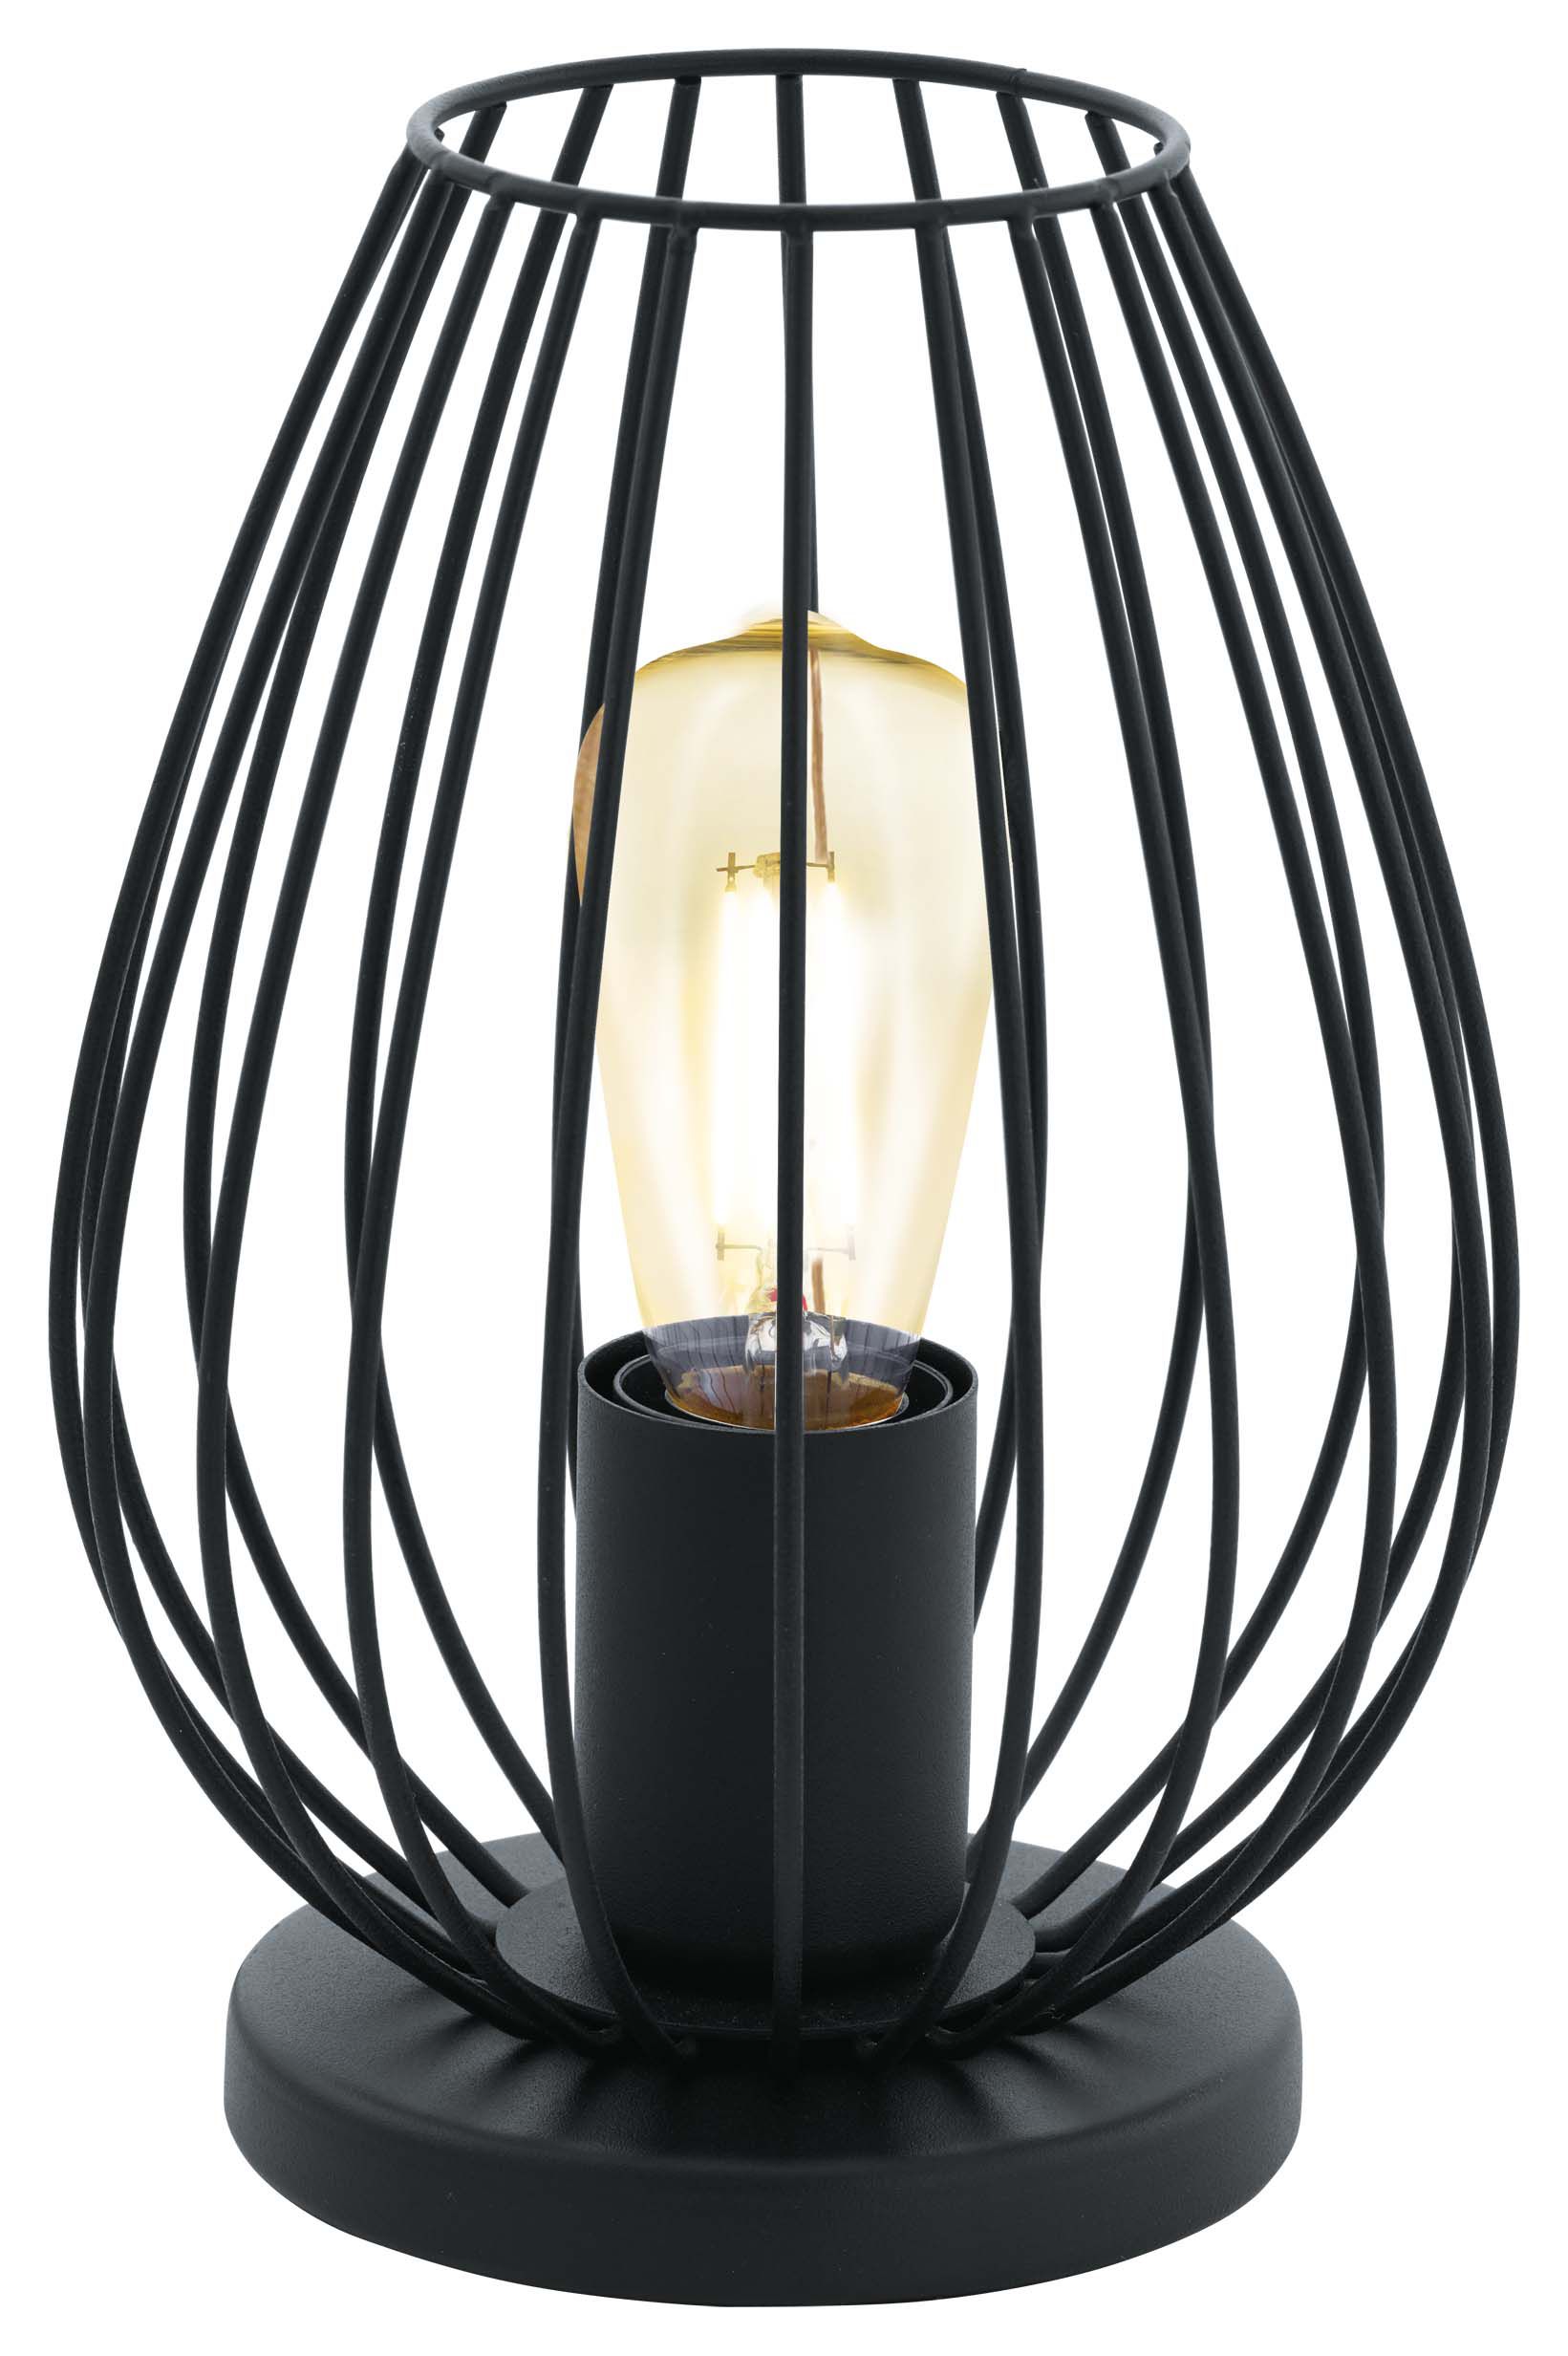 Image of Eglo Newtown Table Lamp - Black